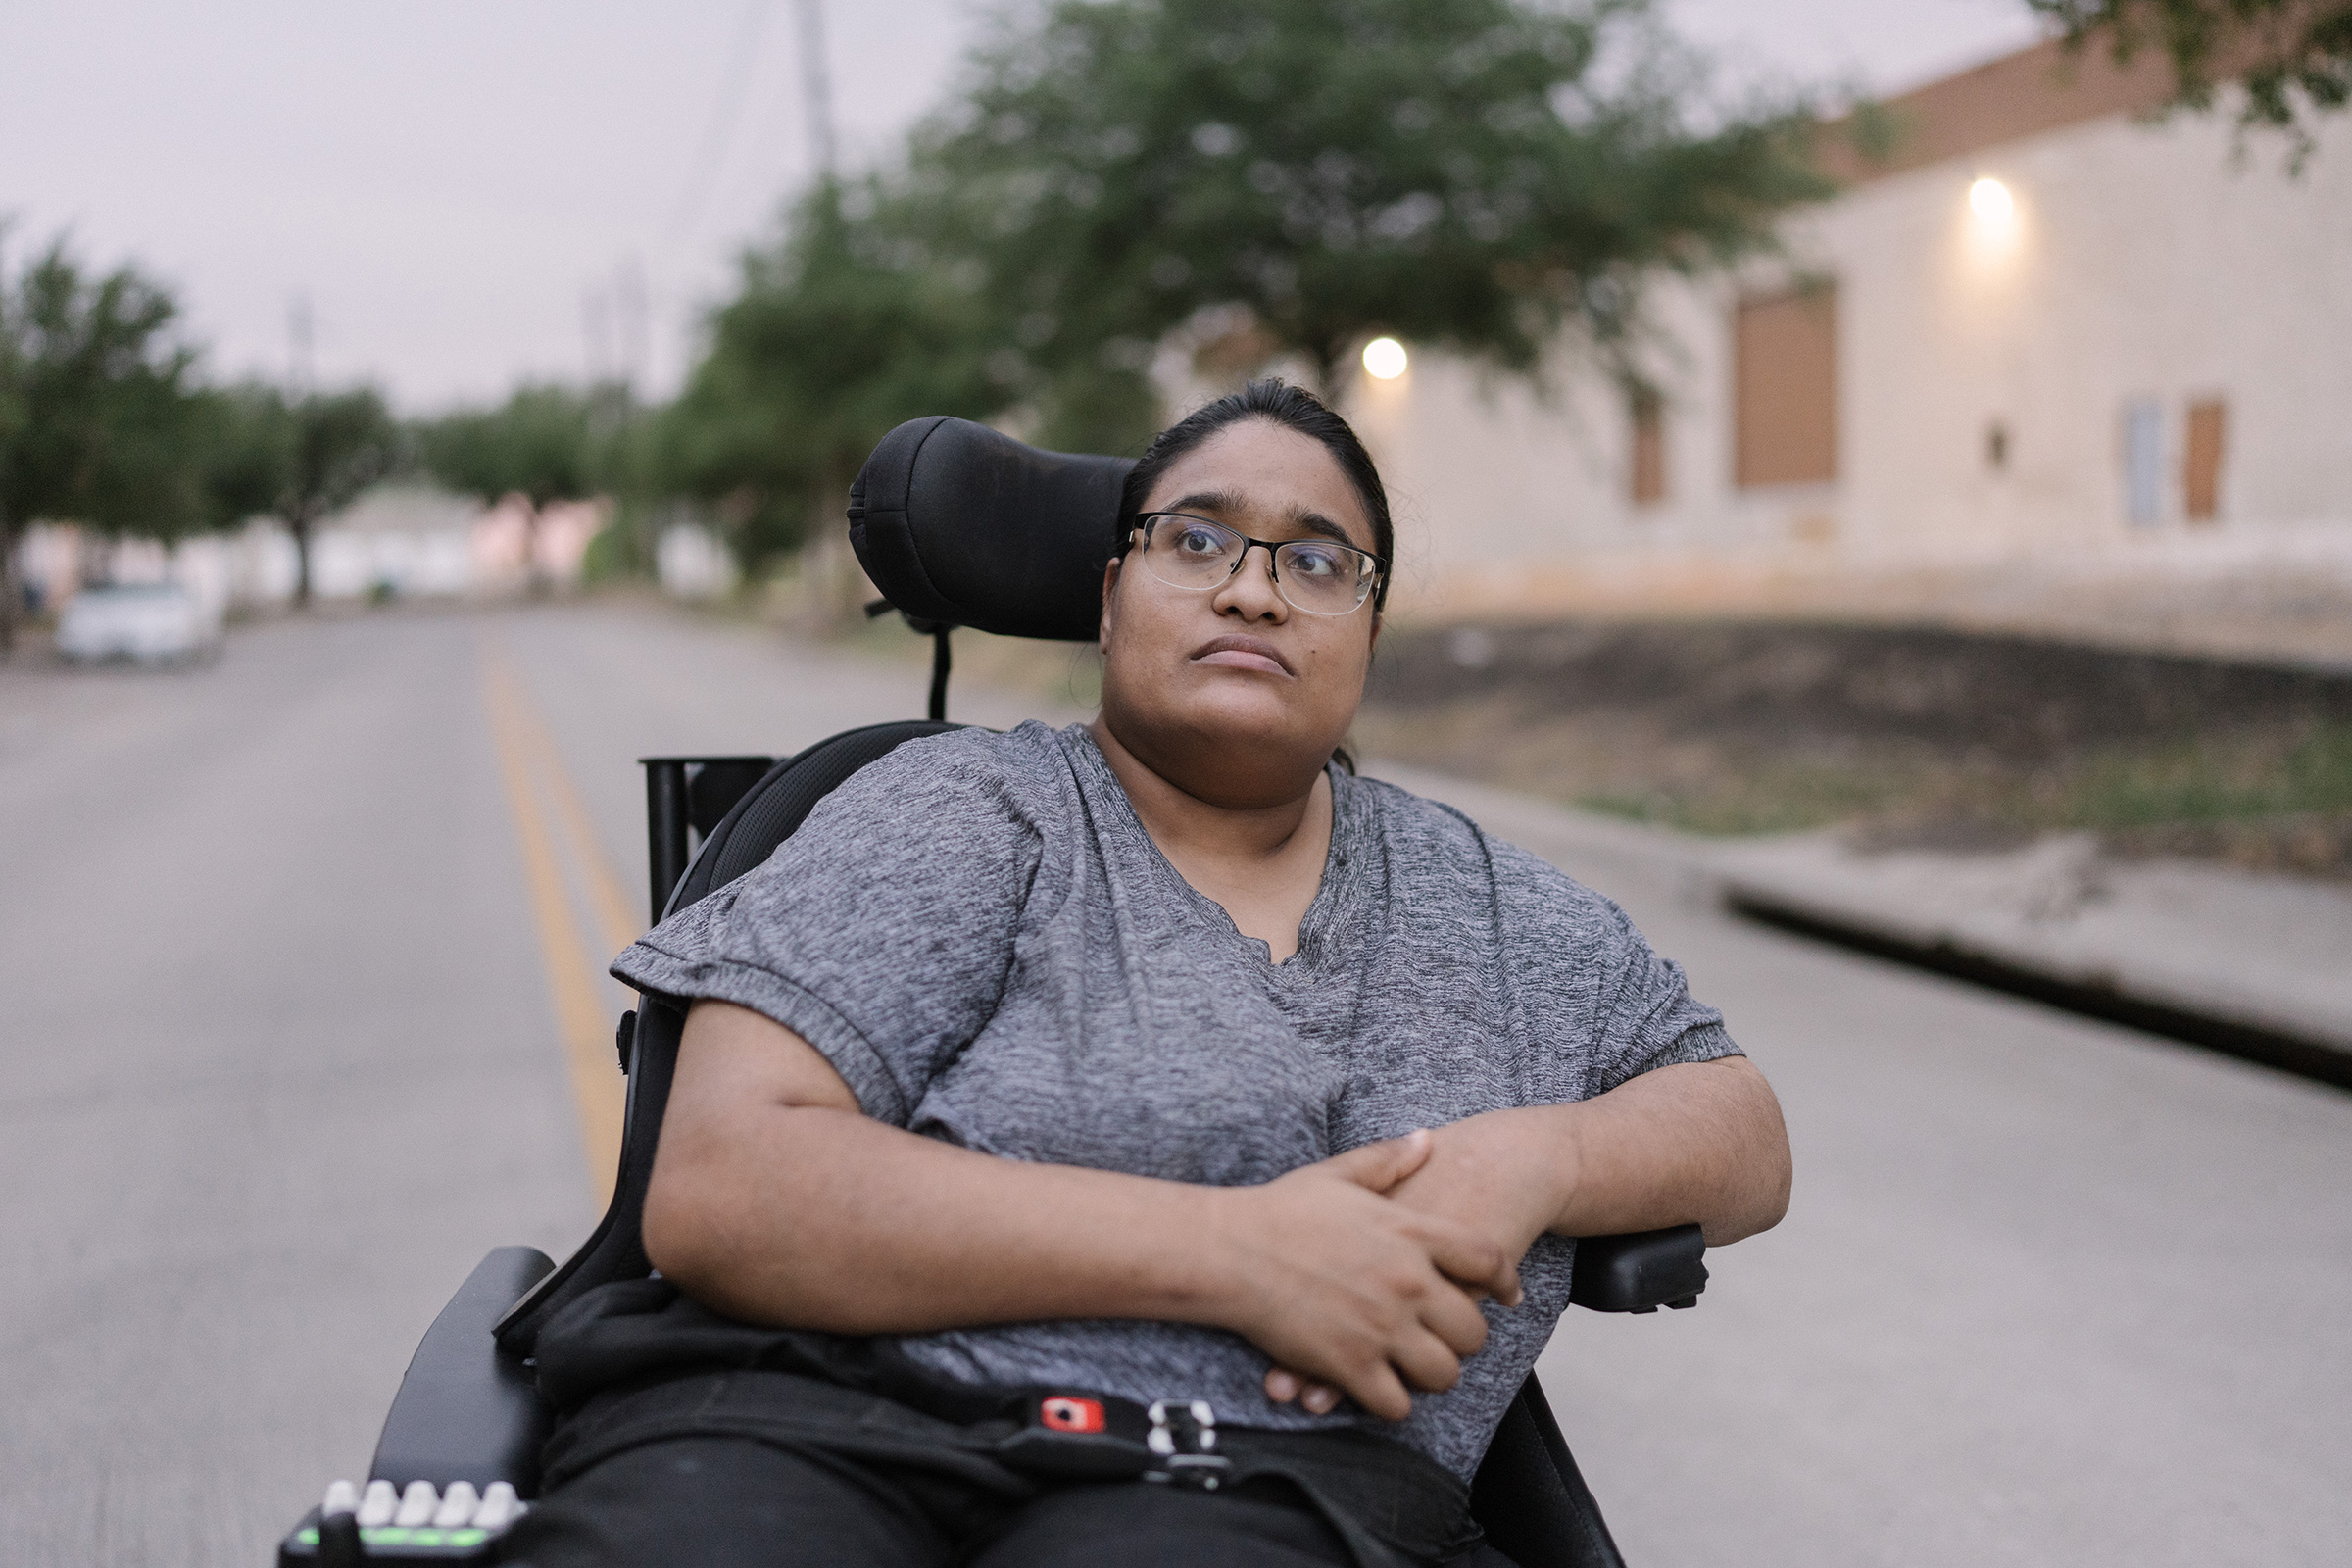 Joy Moonan next to her apartment building in Dallas on July 20, 2022. Moonan, an attorney and disability-rights advocate, uses a wheelchair due to her cerebral palsy. (Morgan Lieberman)